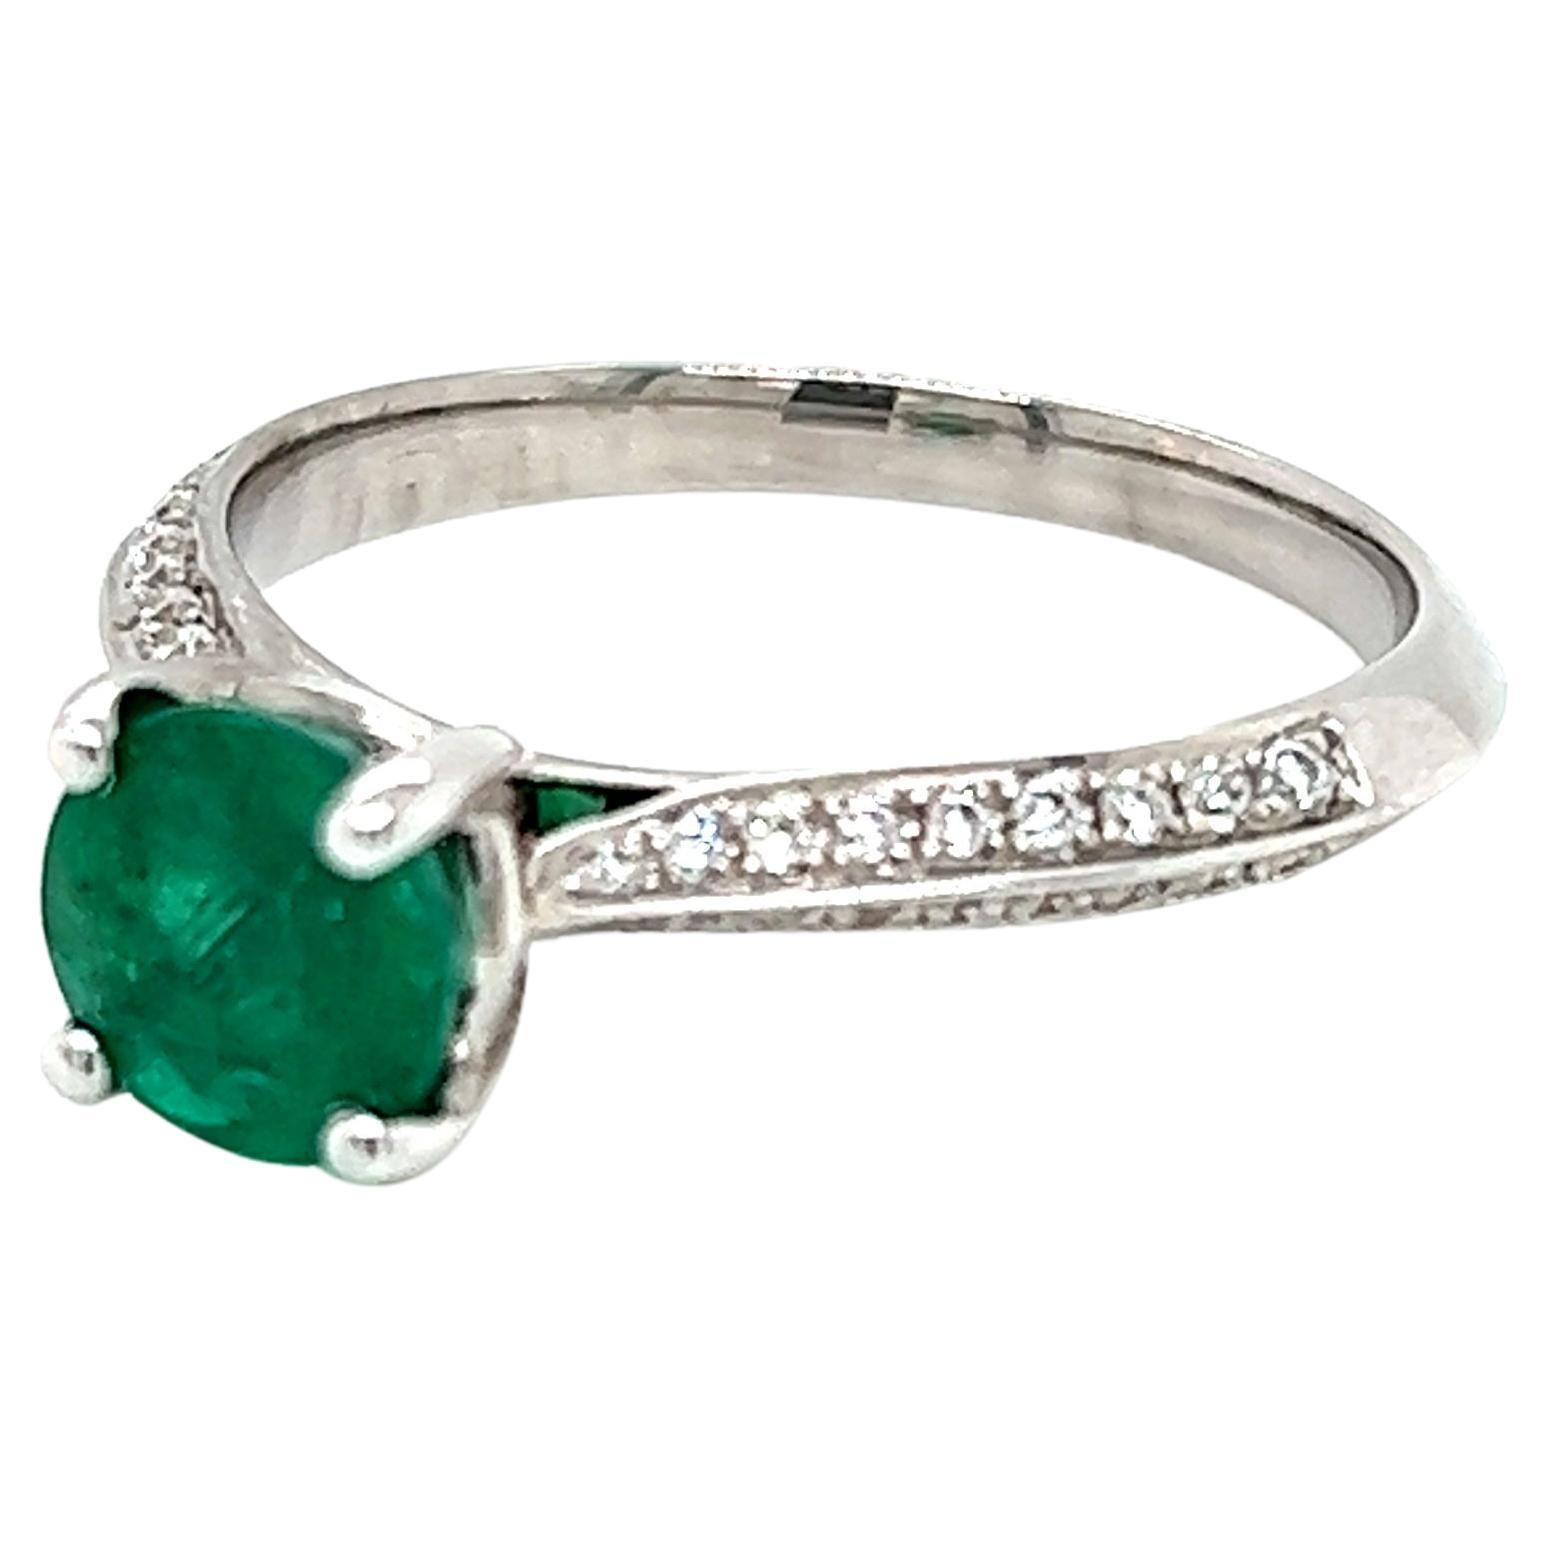 1.1 Carat Round Brilliant Emerald and Diamond Ring in 18 Karat White Gold For Sale